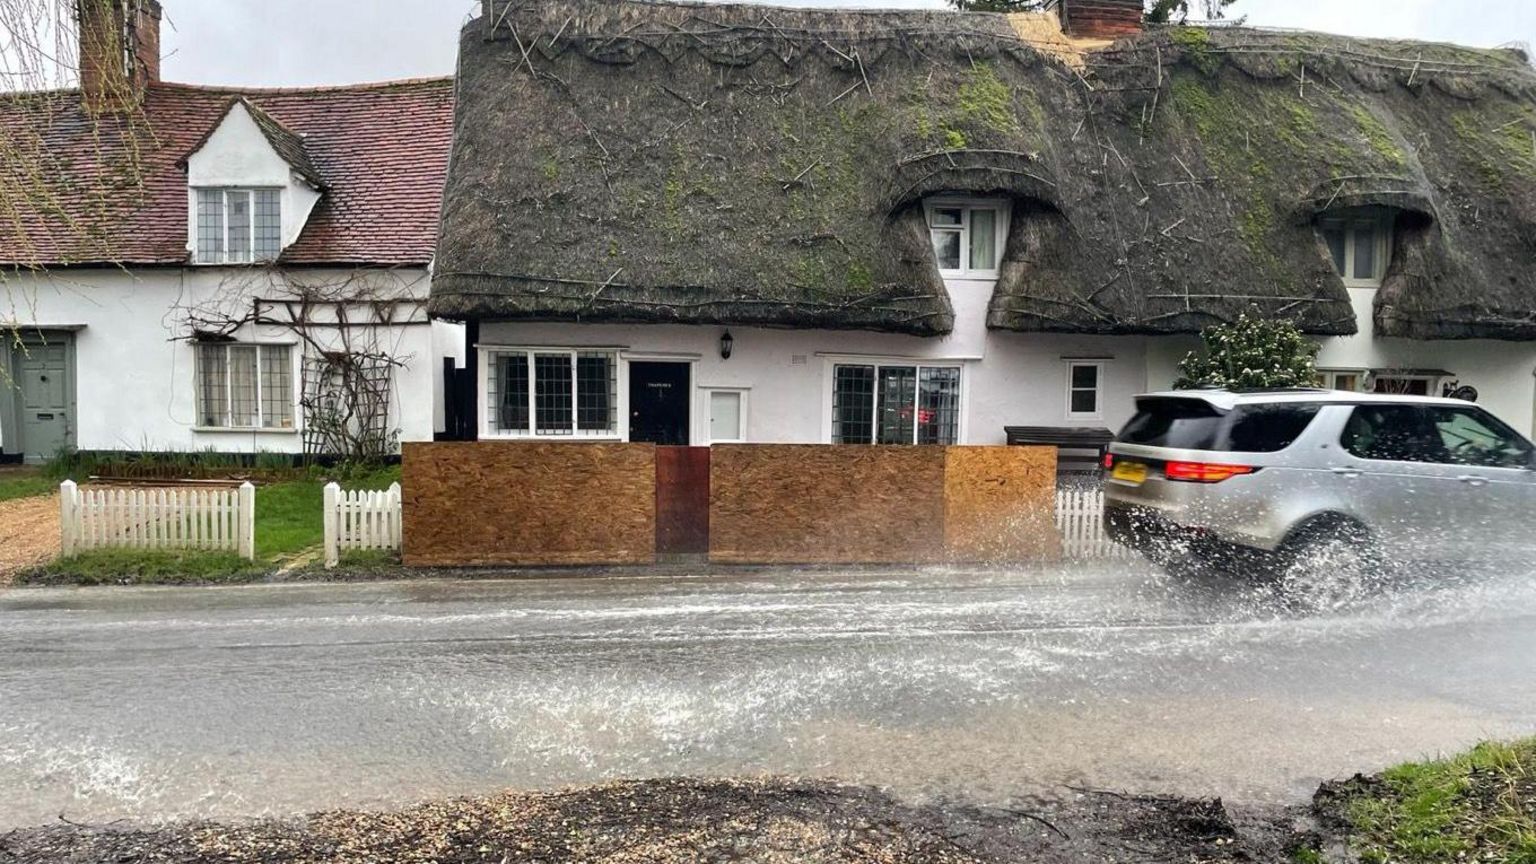 Cottage with wooden board barricading around it and a car driving past in flood water